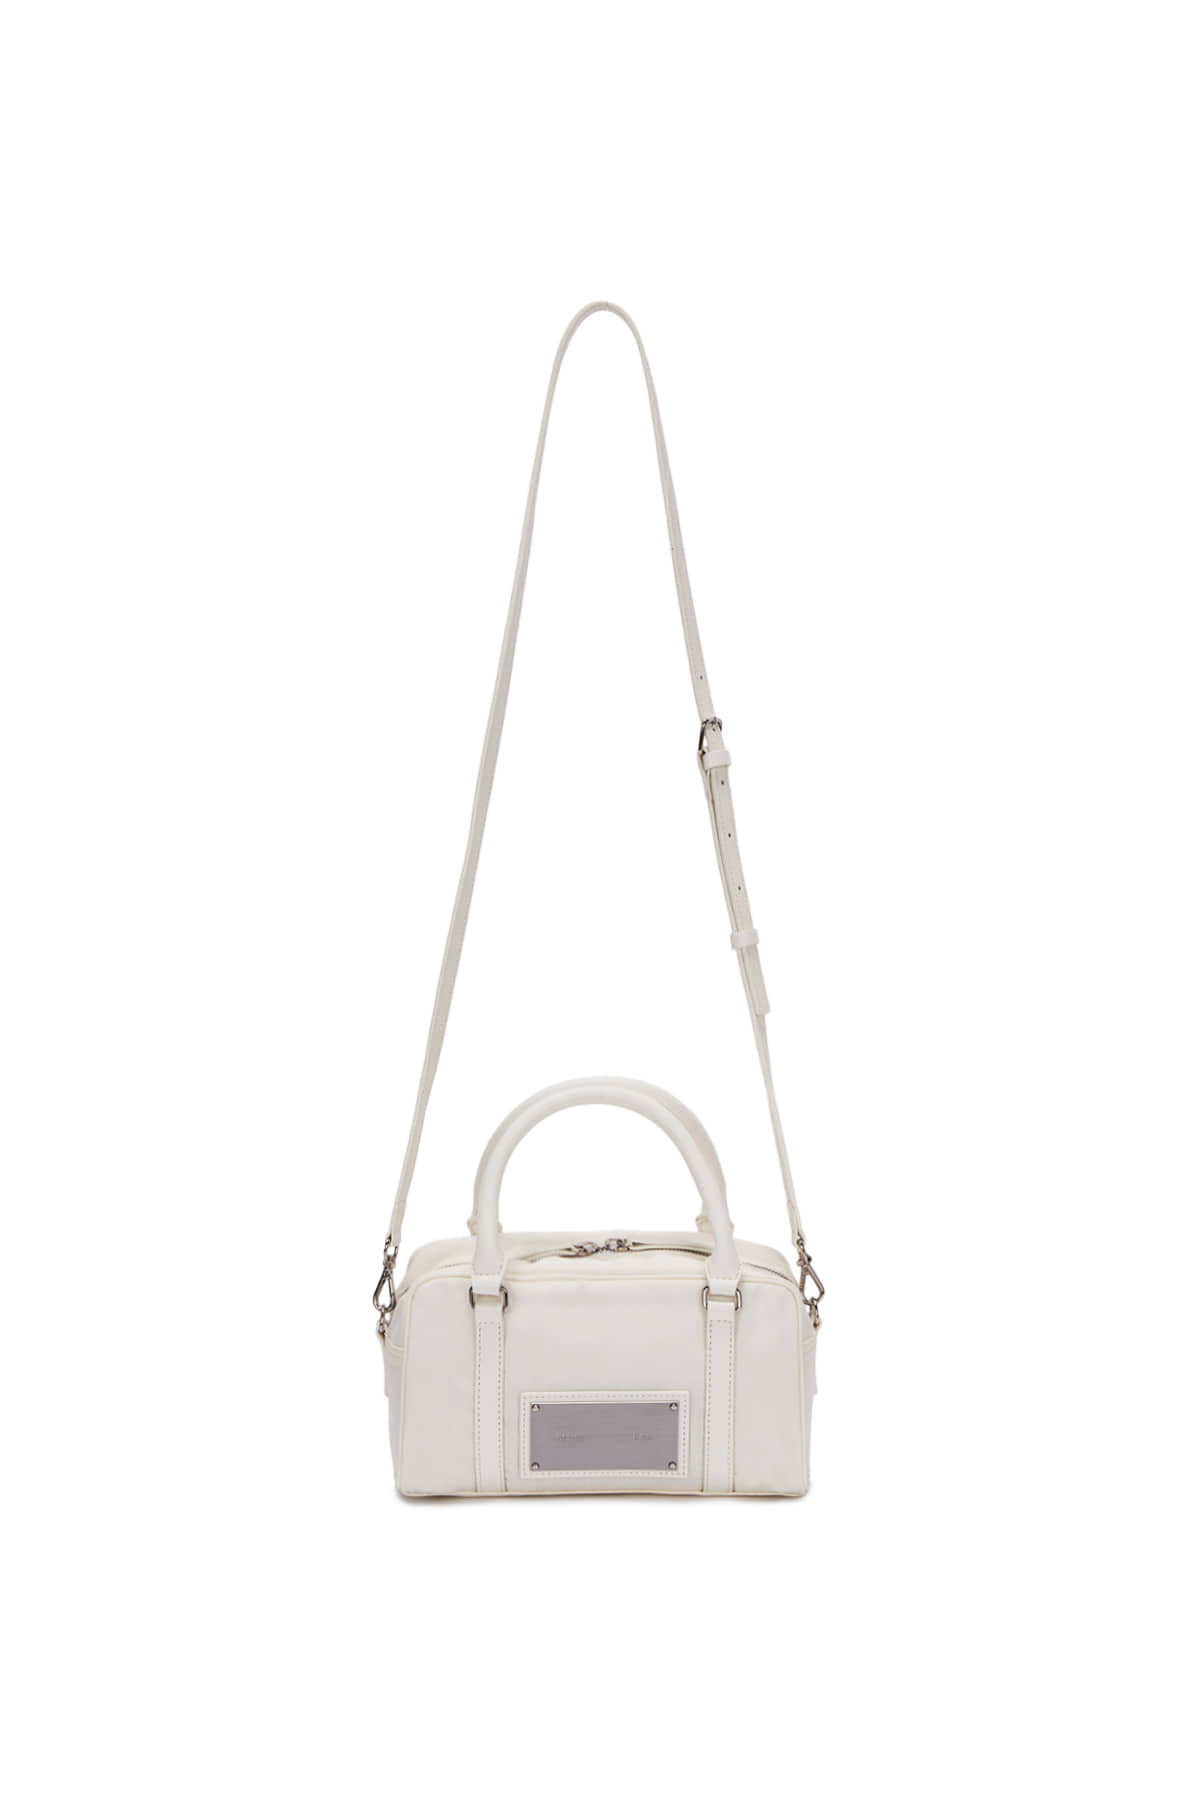 BABY SPORTY TOTE BAG IN IVORY - MATINKIM